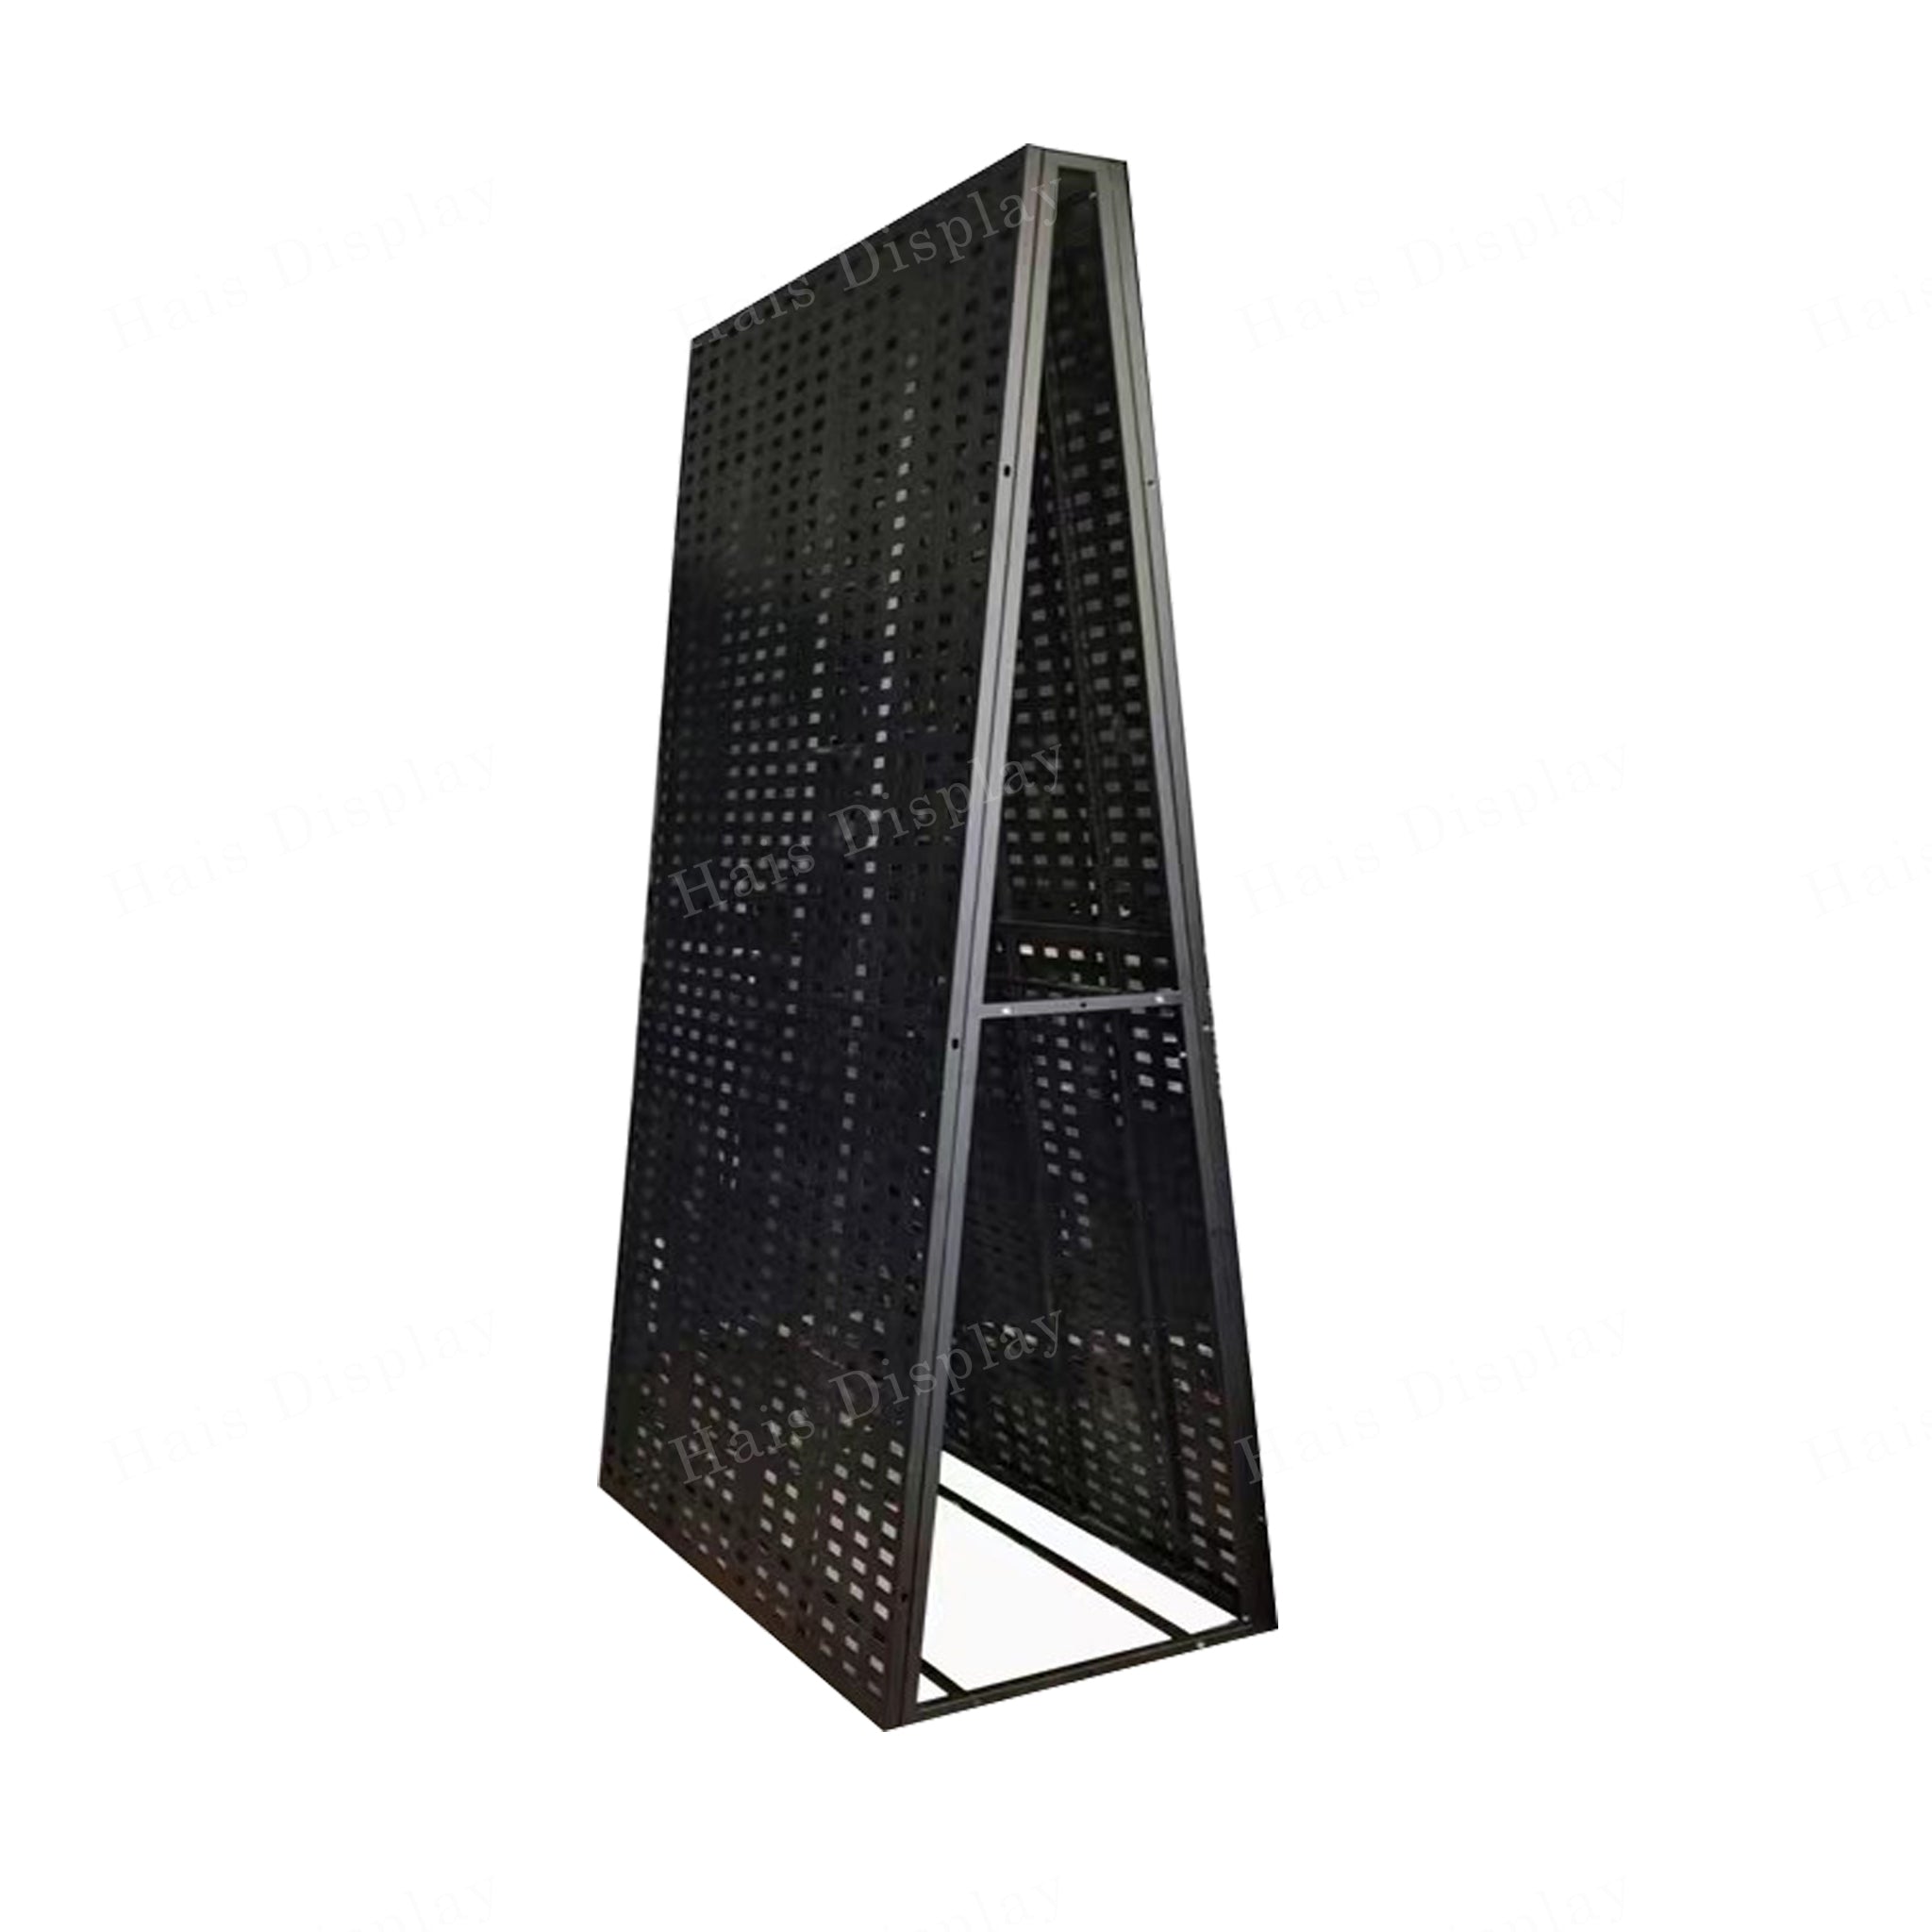 Double Sided Ceramic Tile Display Stand -1200x2800mm - 3sets